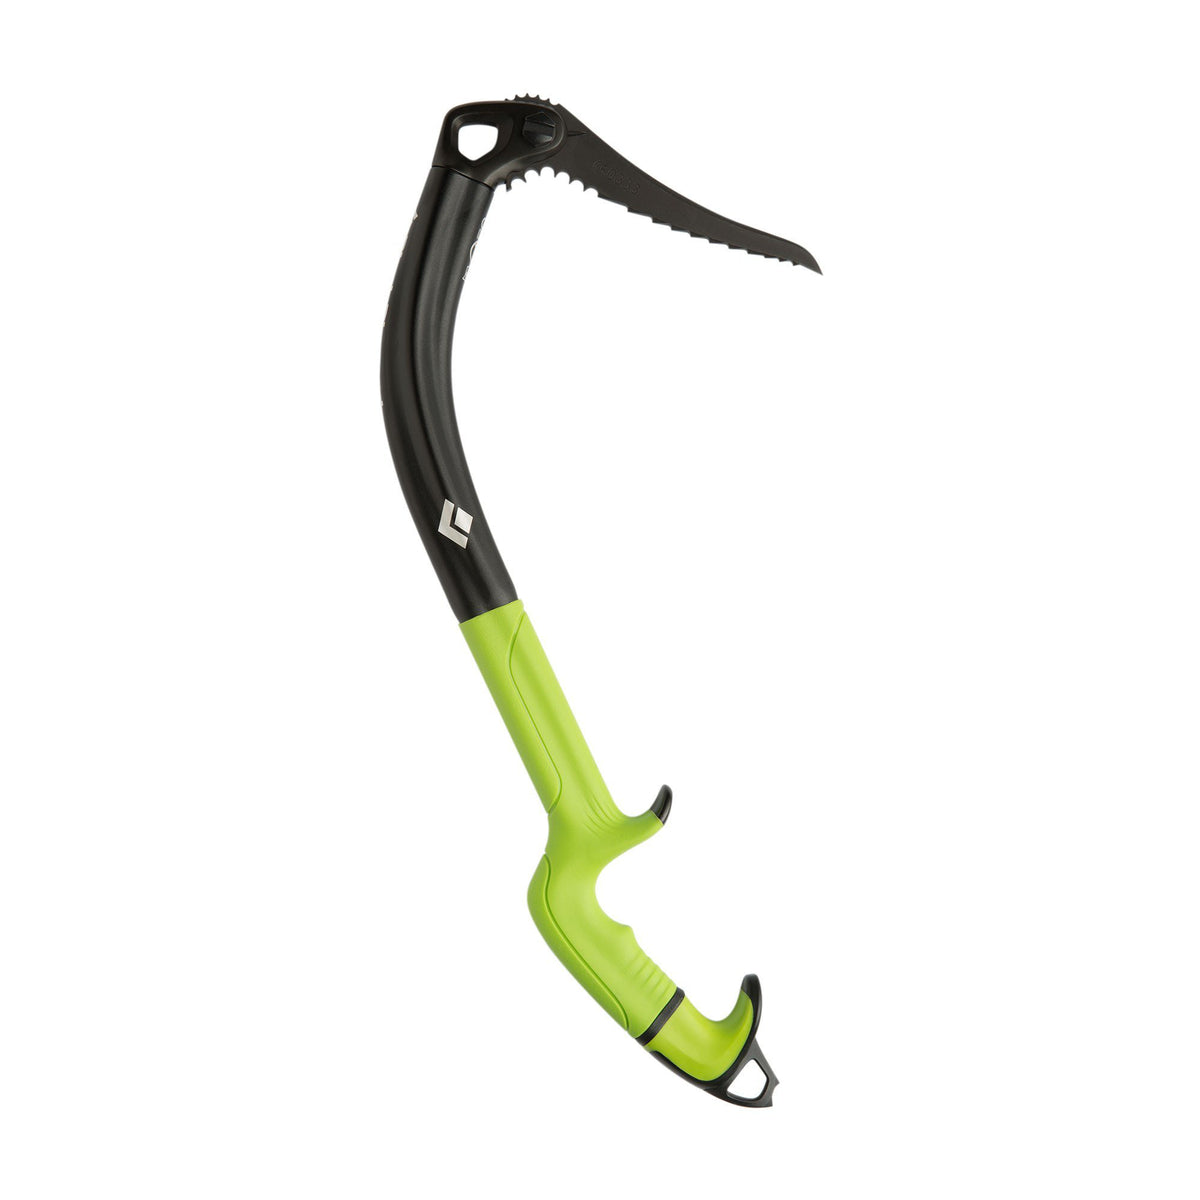 Black Diamond Fuel Ice Tool, with a green handle and black pick